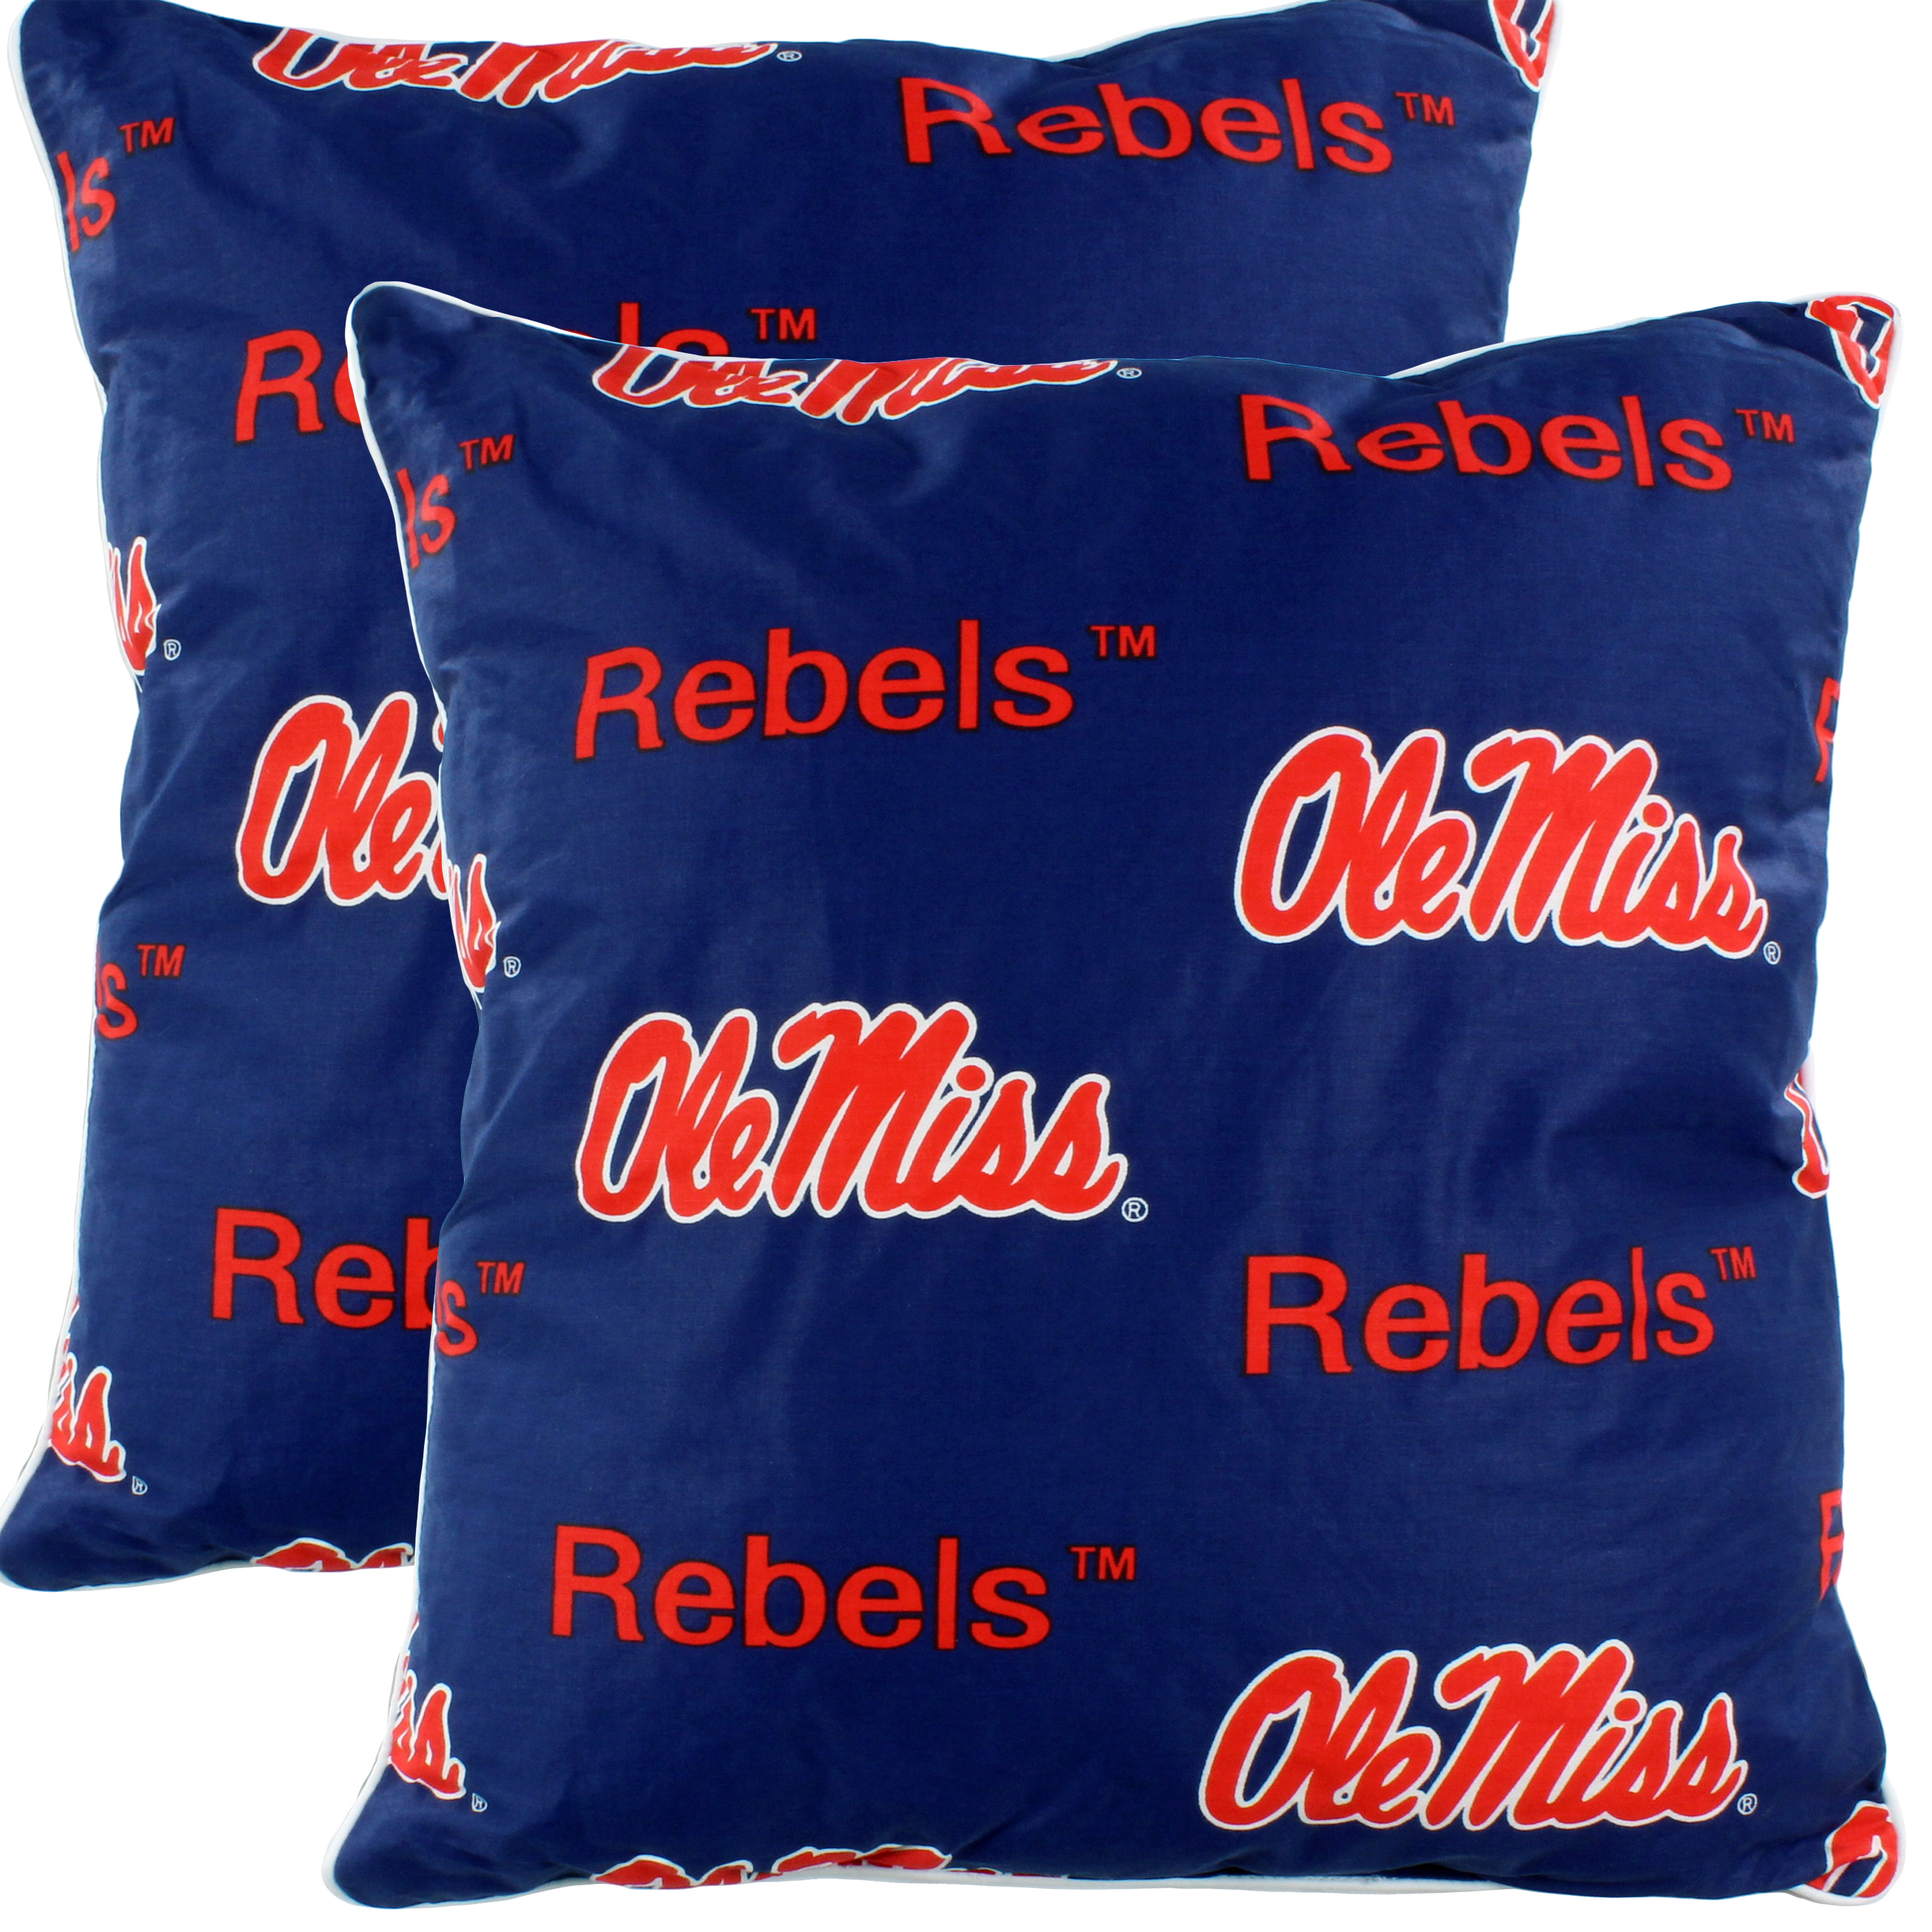 Mississippi Rebels 16" x 16" Decorative Pillow - (Includes 2 Decorative Pillows) - image 1 of 8